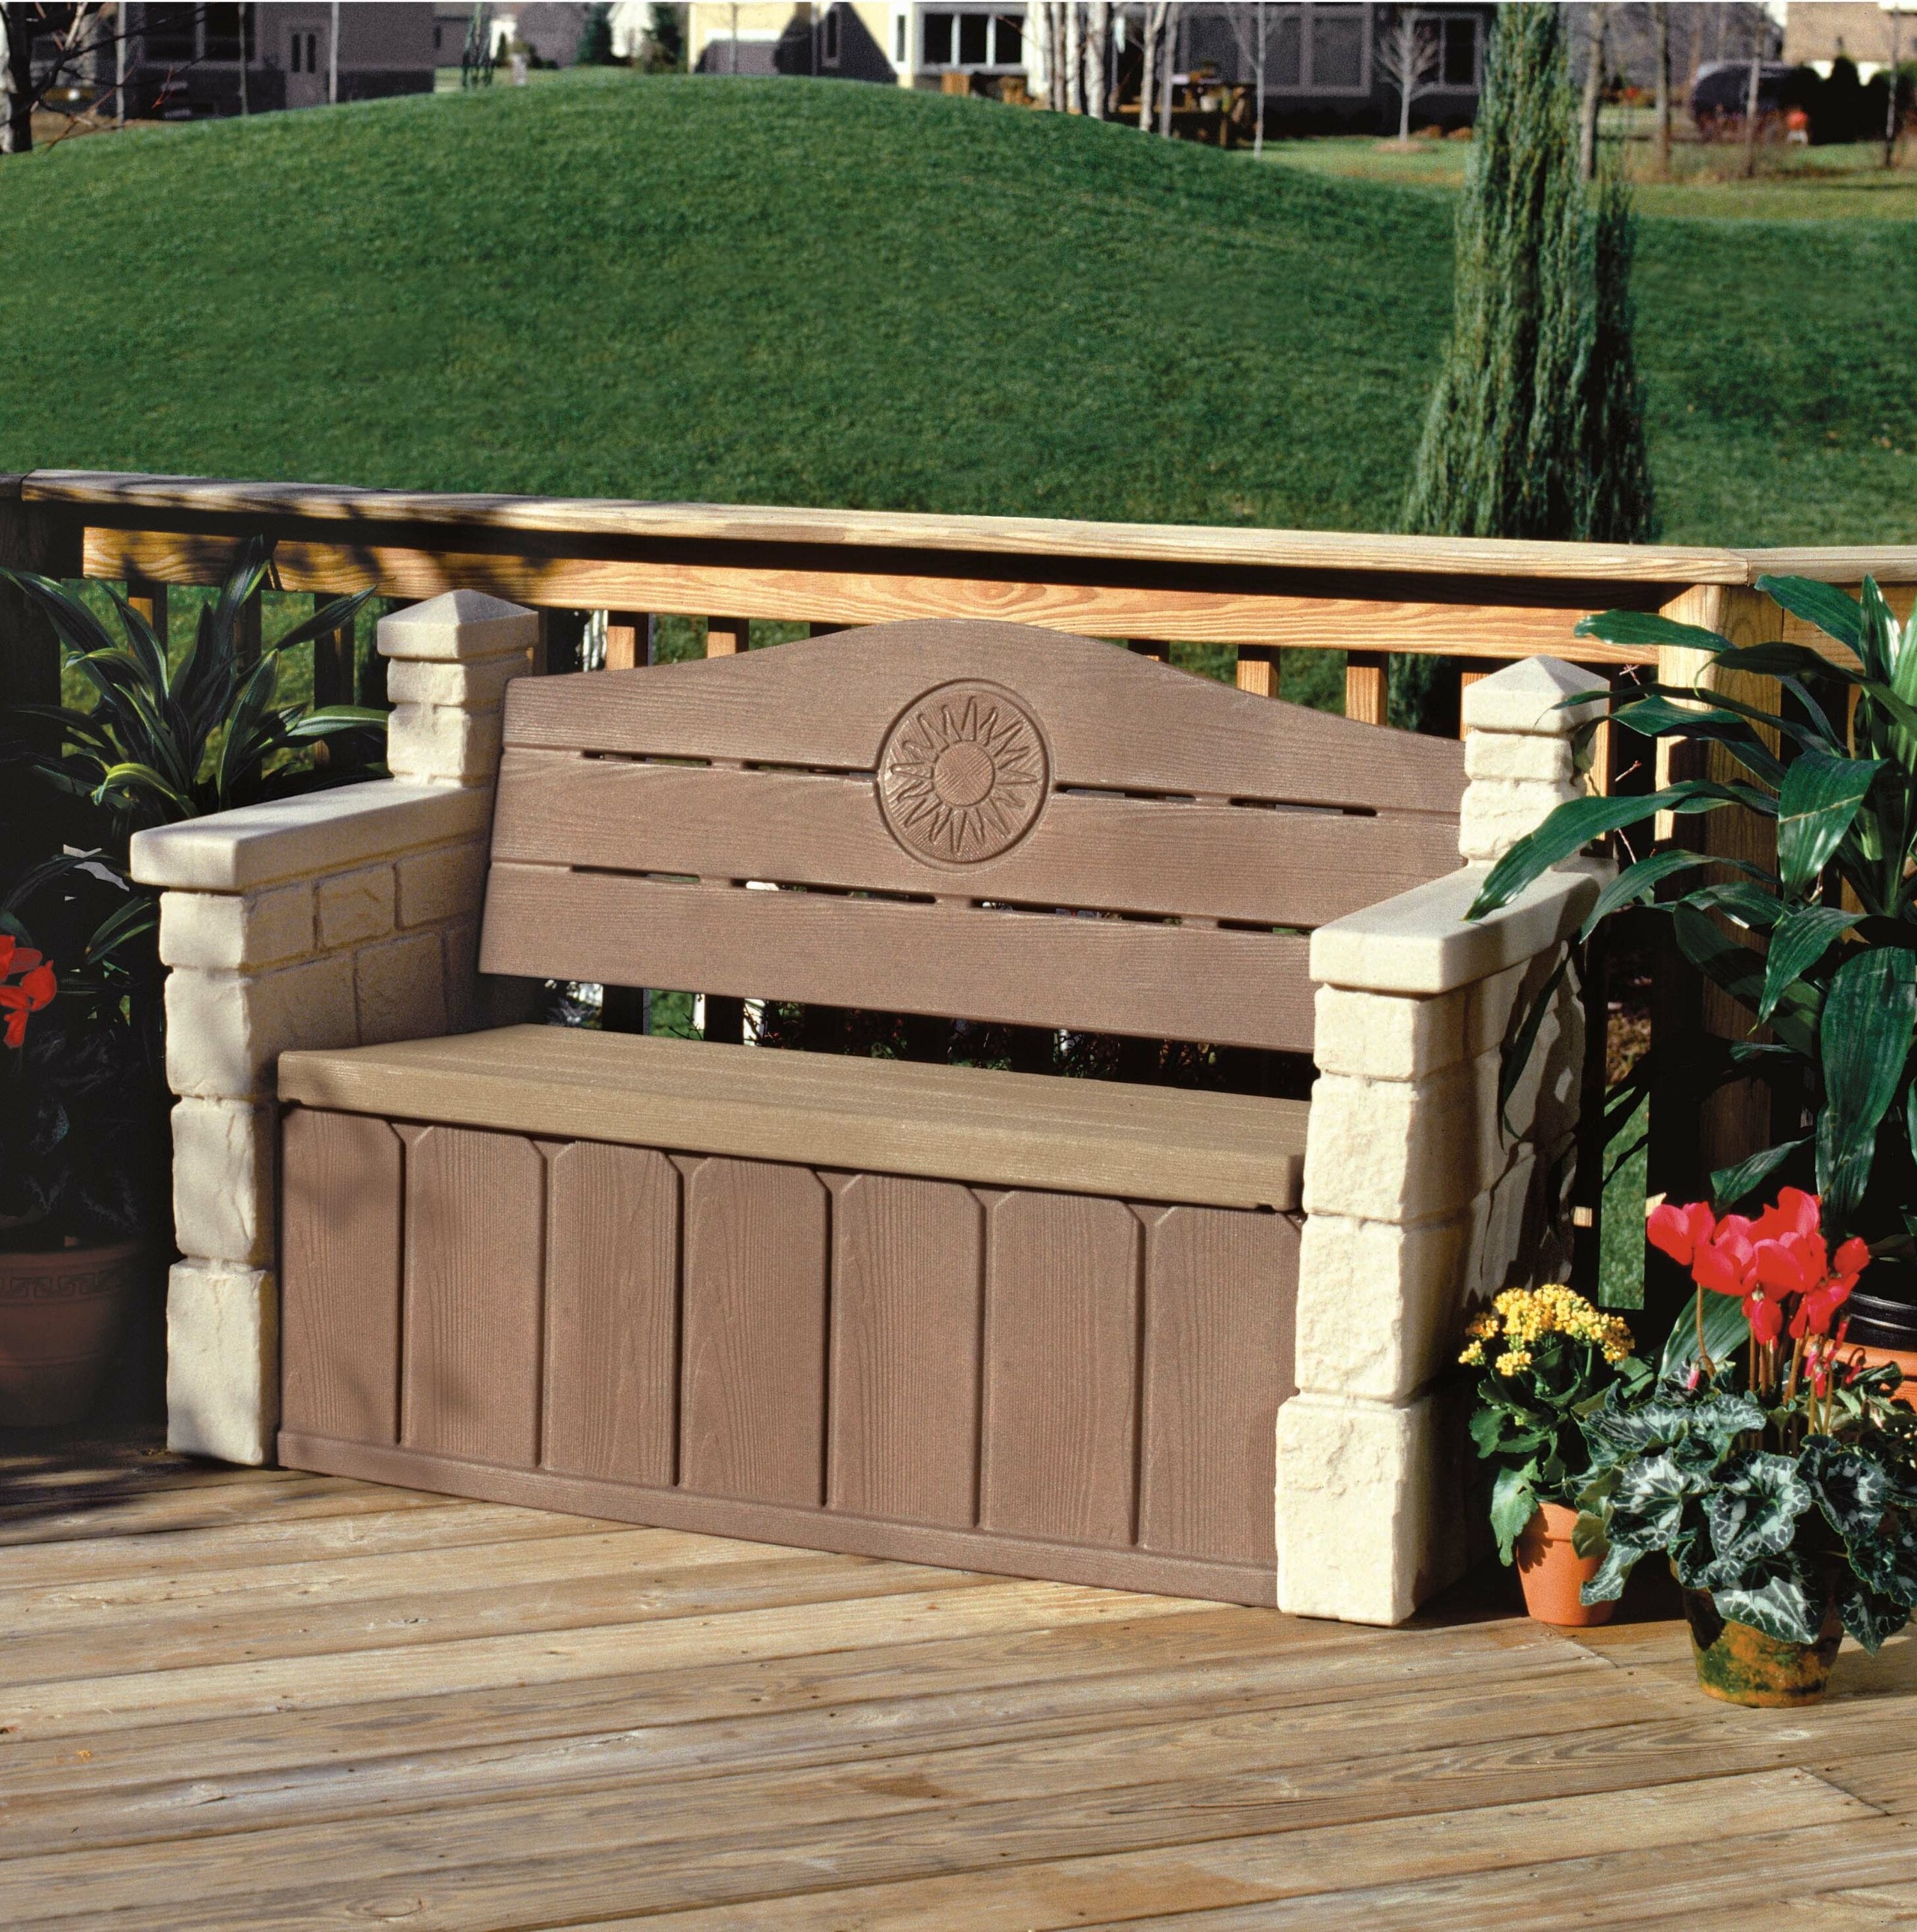 Outsunny Wooden Outdoor Storage Bench Patio Loveseat Seating